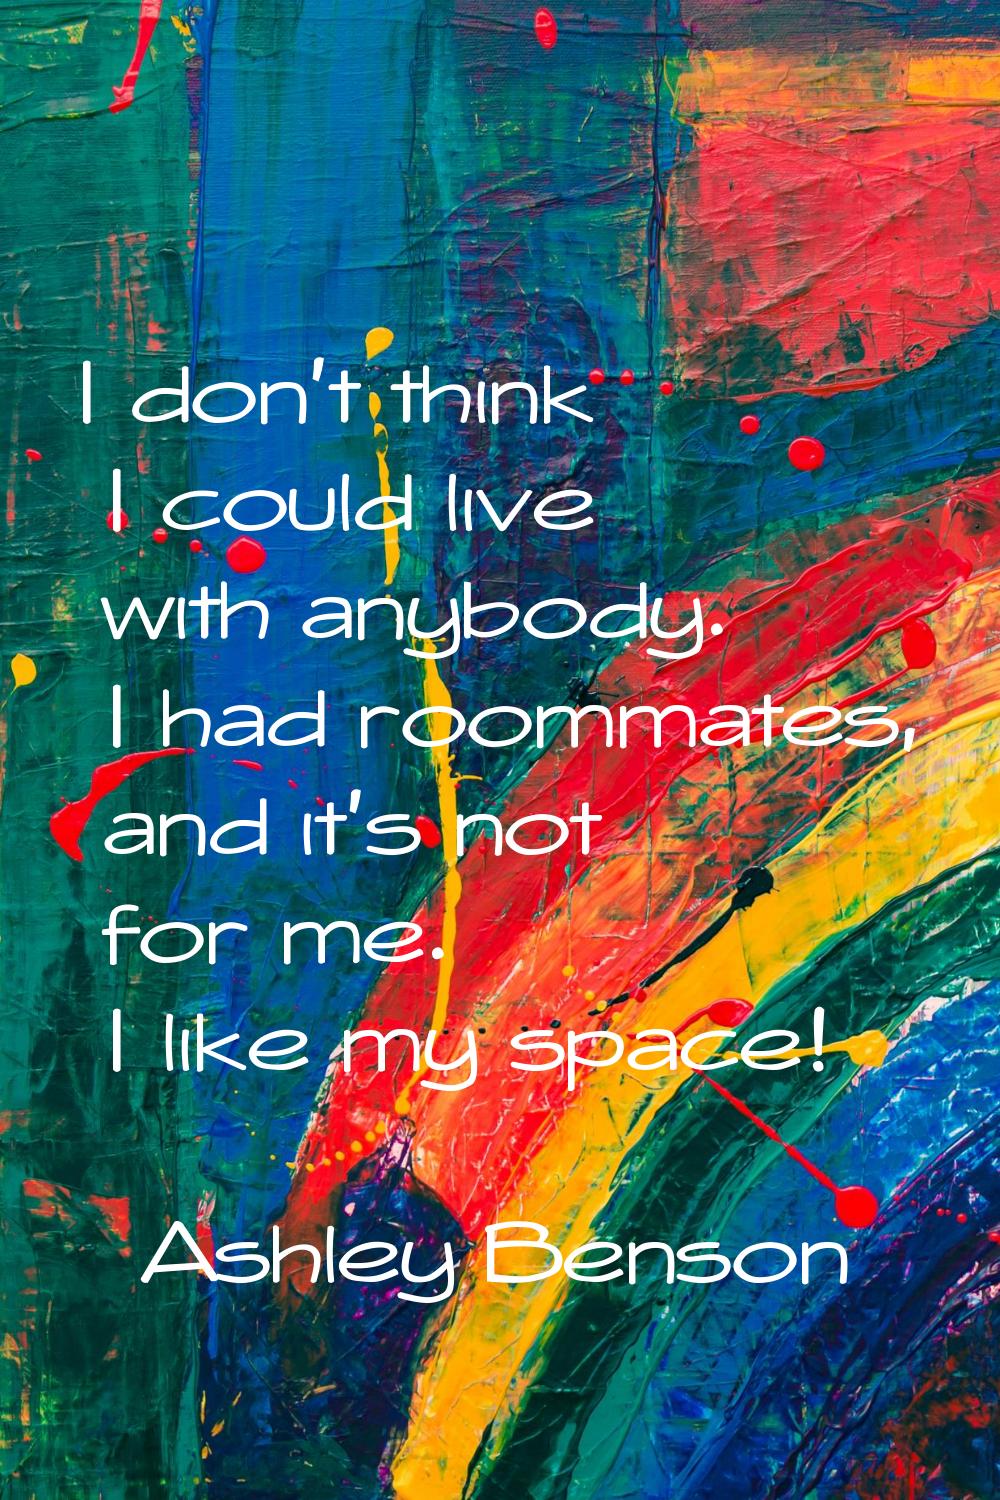 I don't think I could live with anybody. I had roommates, and it's not for me. I like my space!